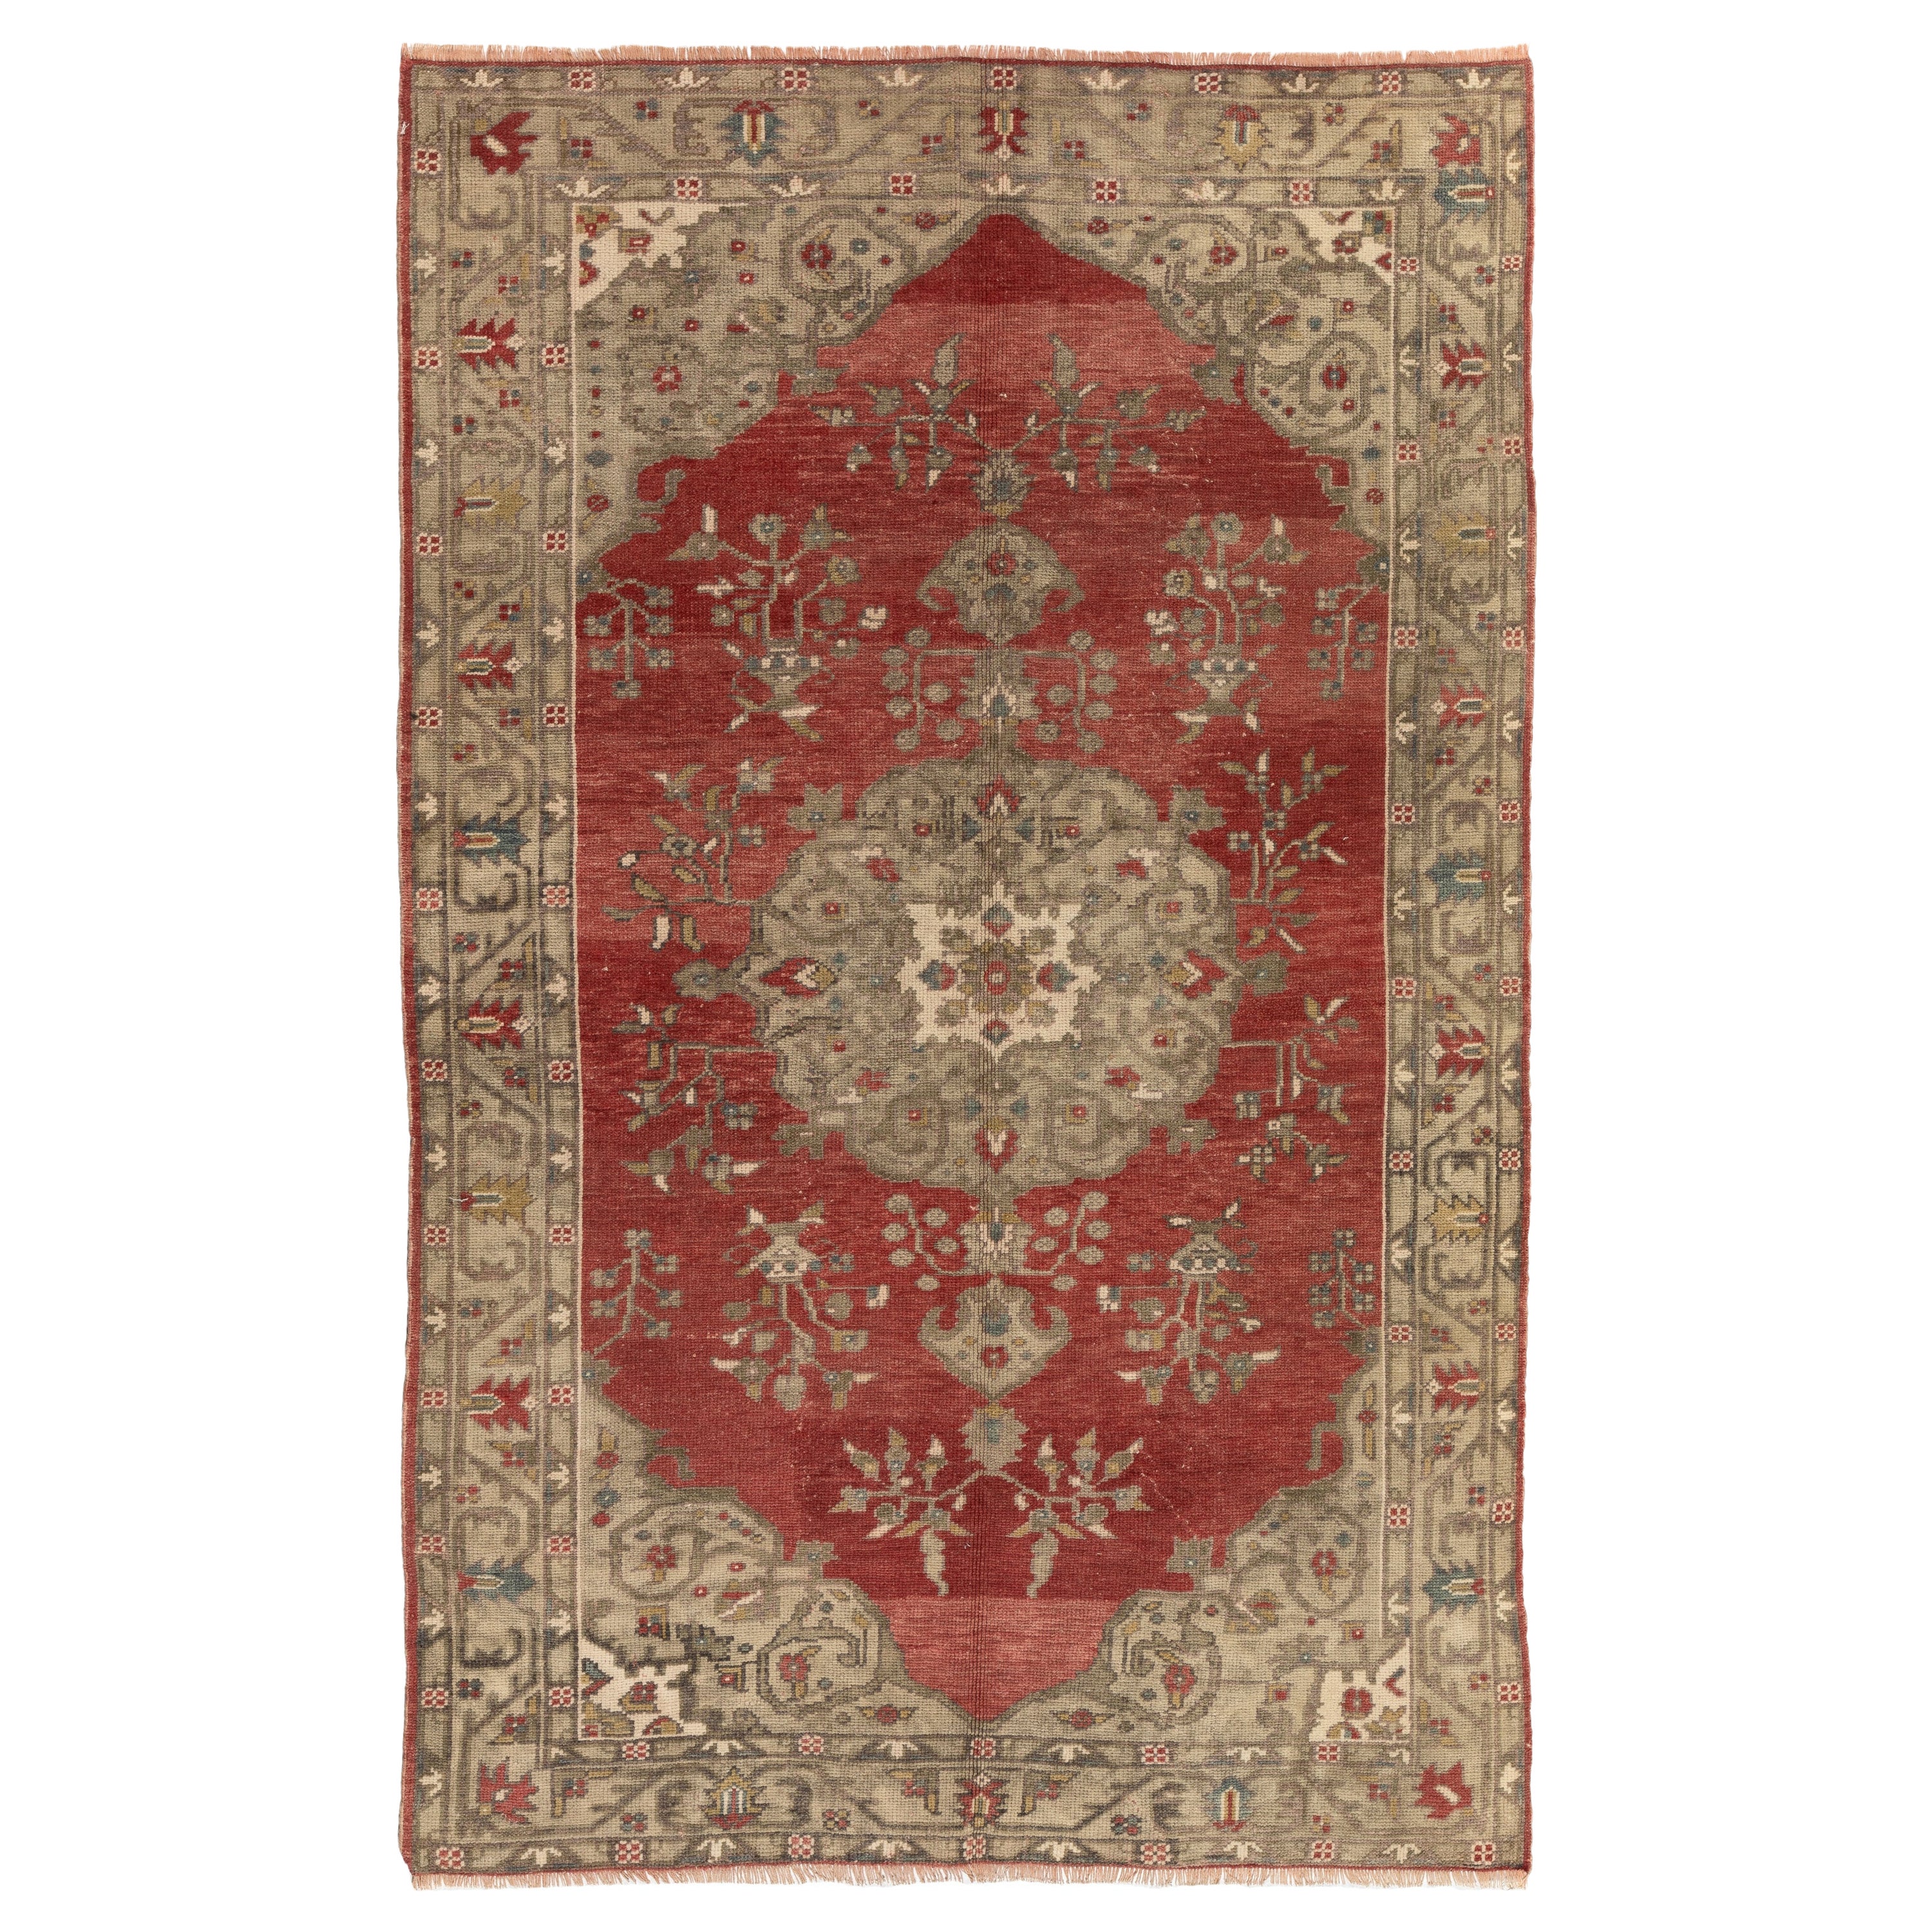 5.5x8.6 Ft Antique Turkish Bergama Rug, circa 1920, One-of-a-kind Carpet For Sale